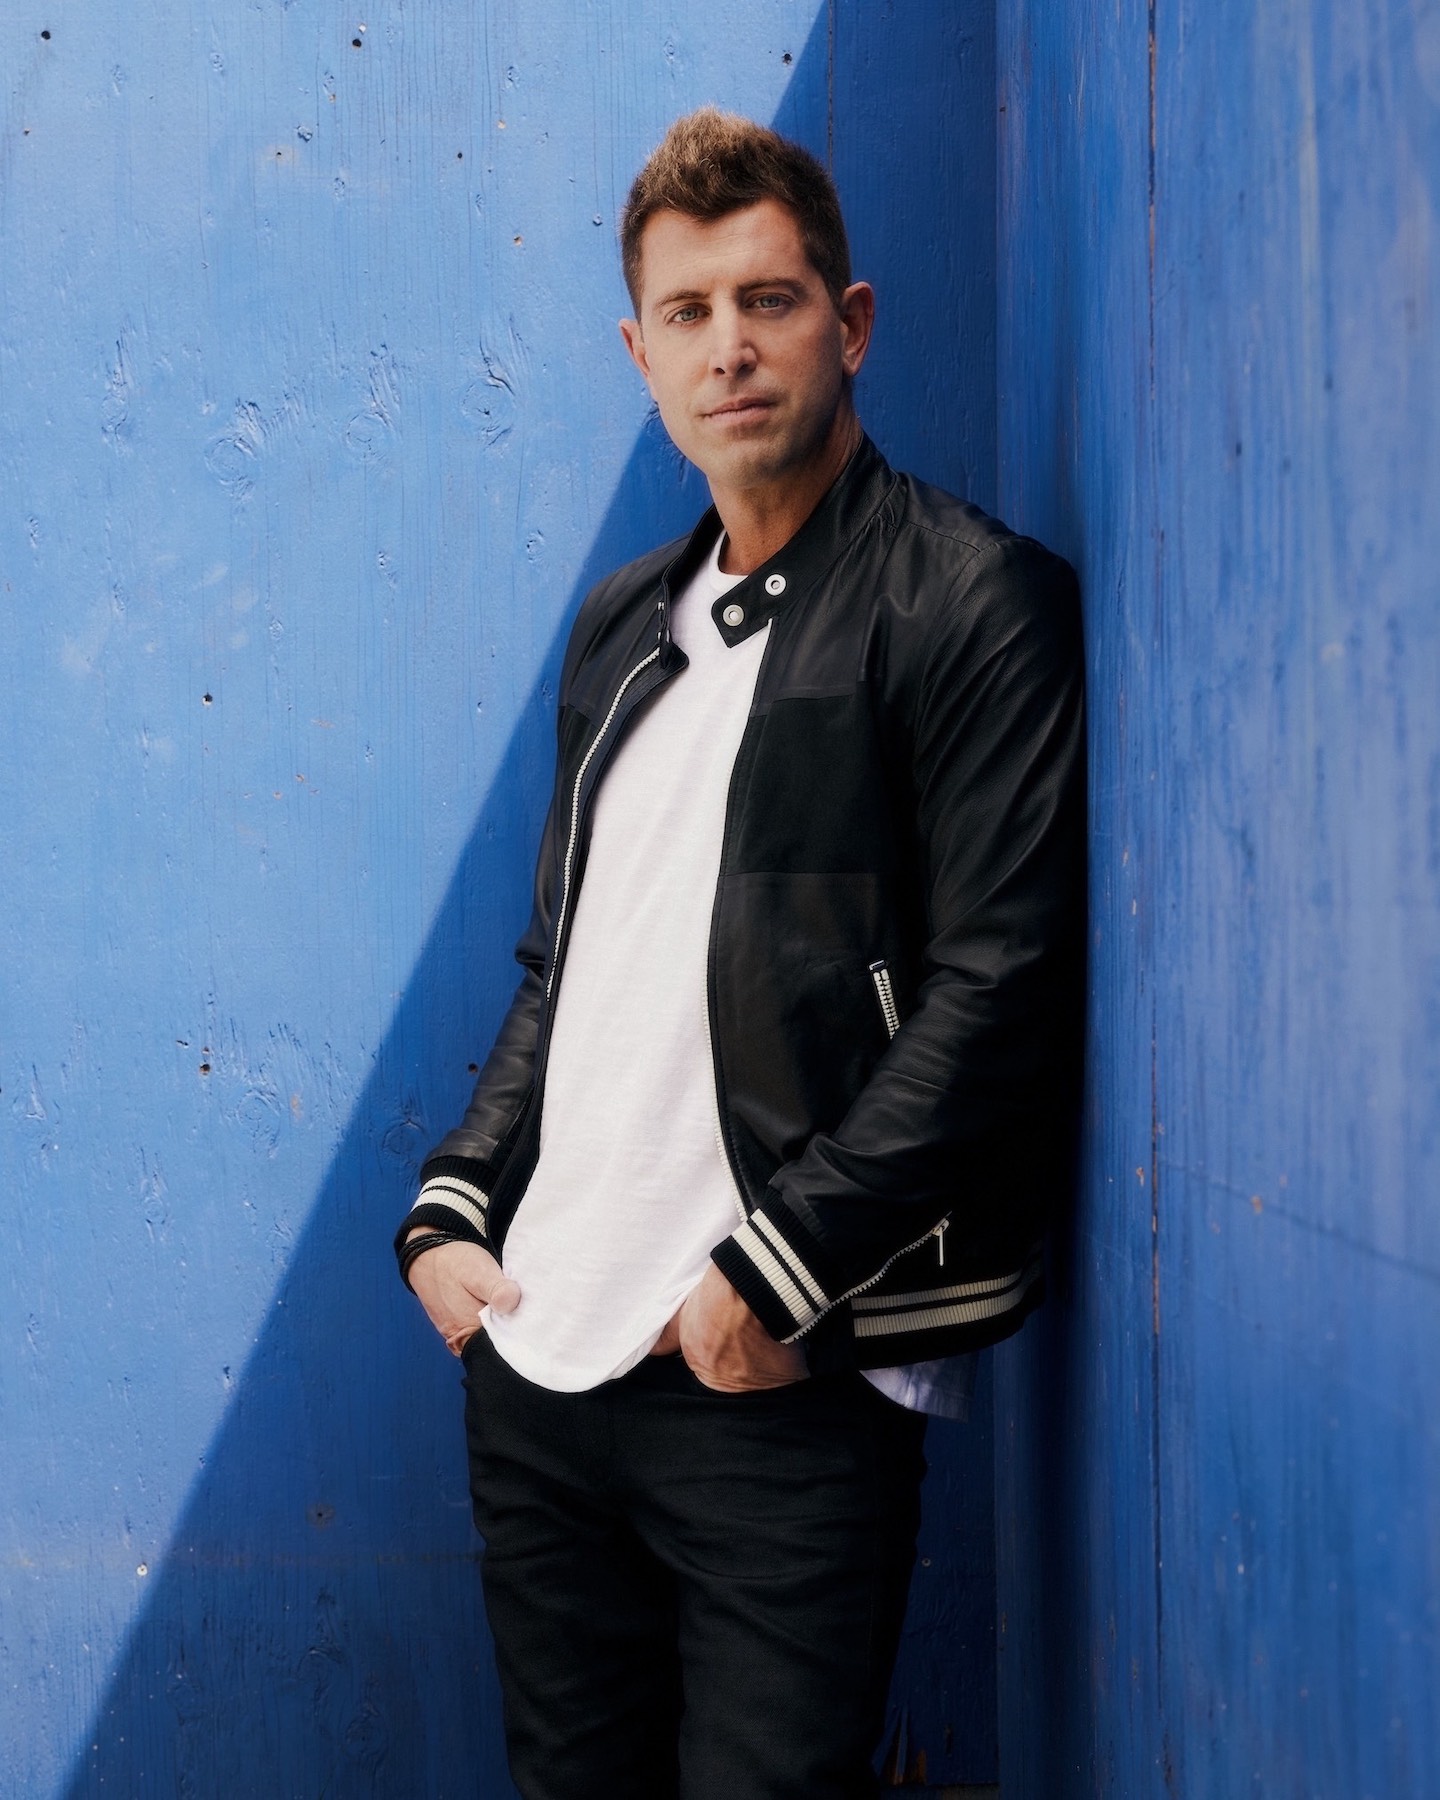 Interview: Jeremy Camp brings 'I Still Believe Tour' to Buffalo